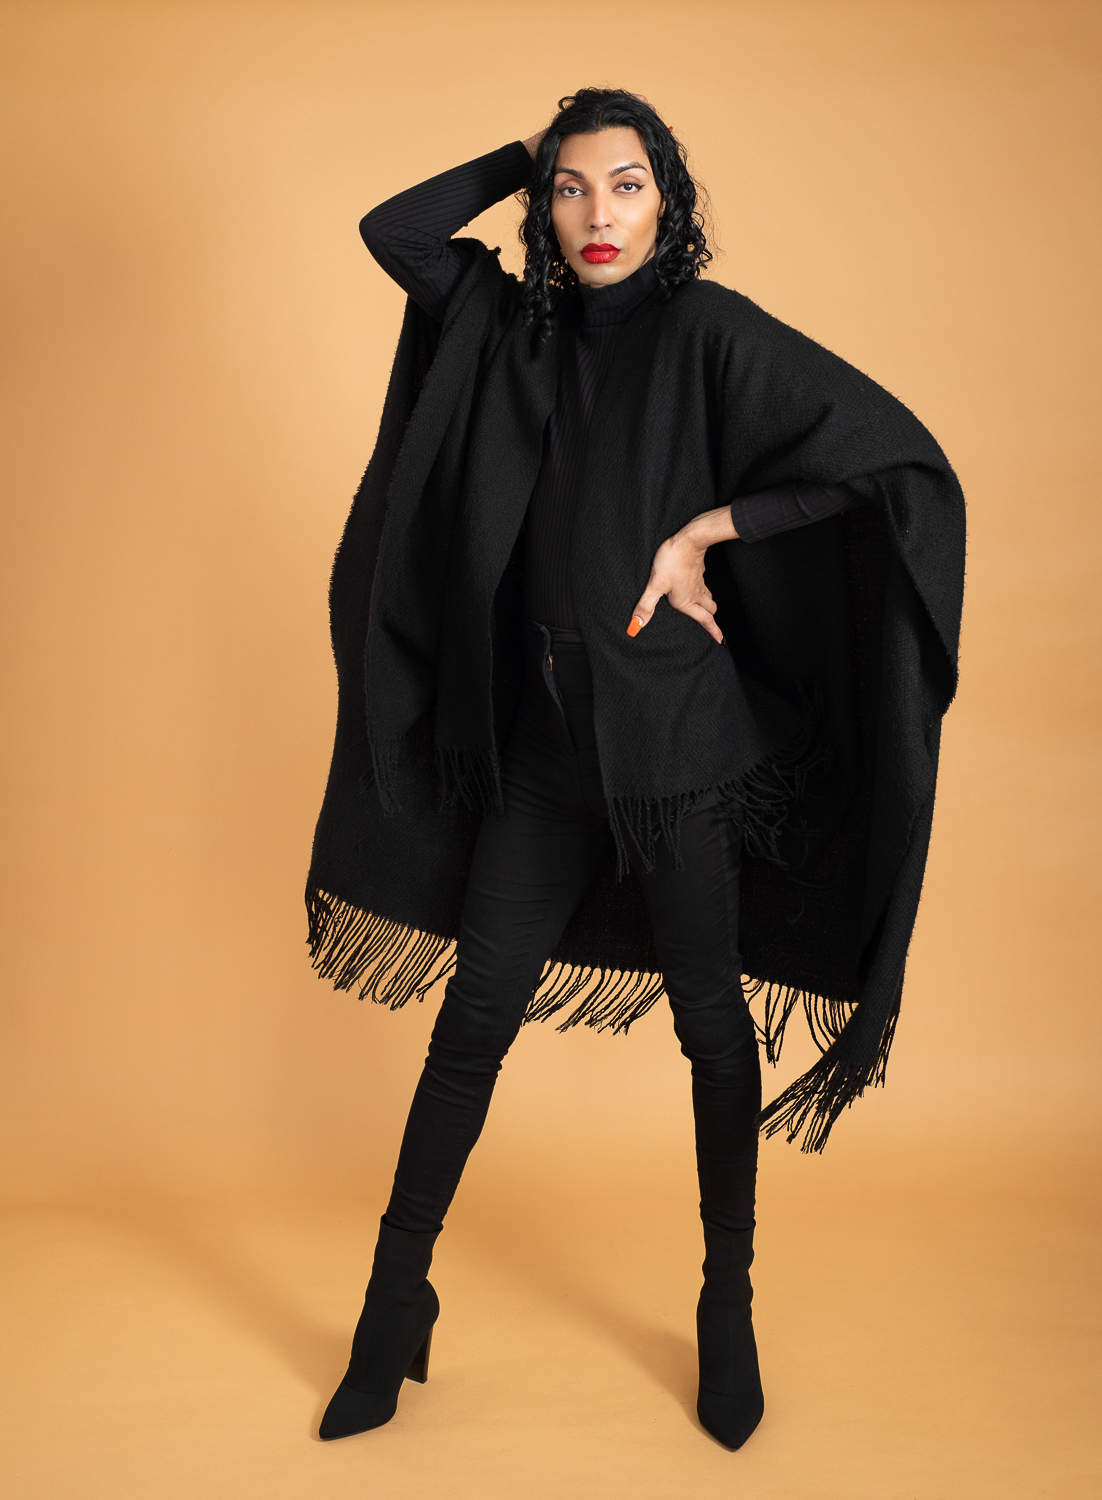 Melbourne trans model poses in an all black outfit on an orange seamless background. They have a confident pose and expression and wear red lipstick.